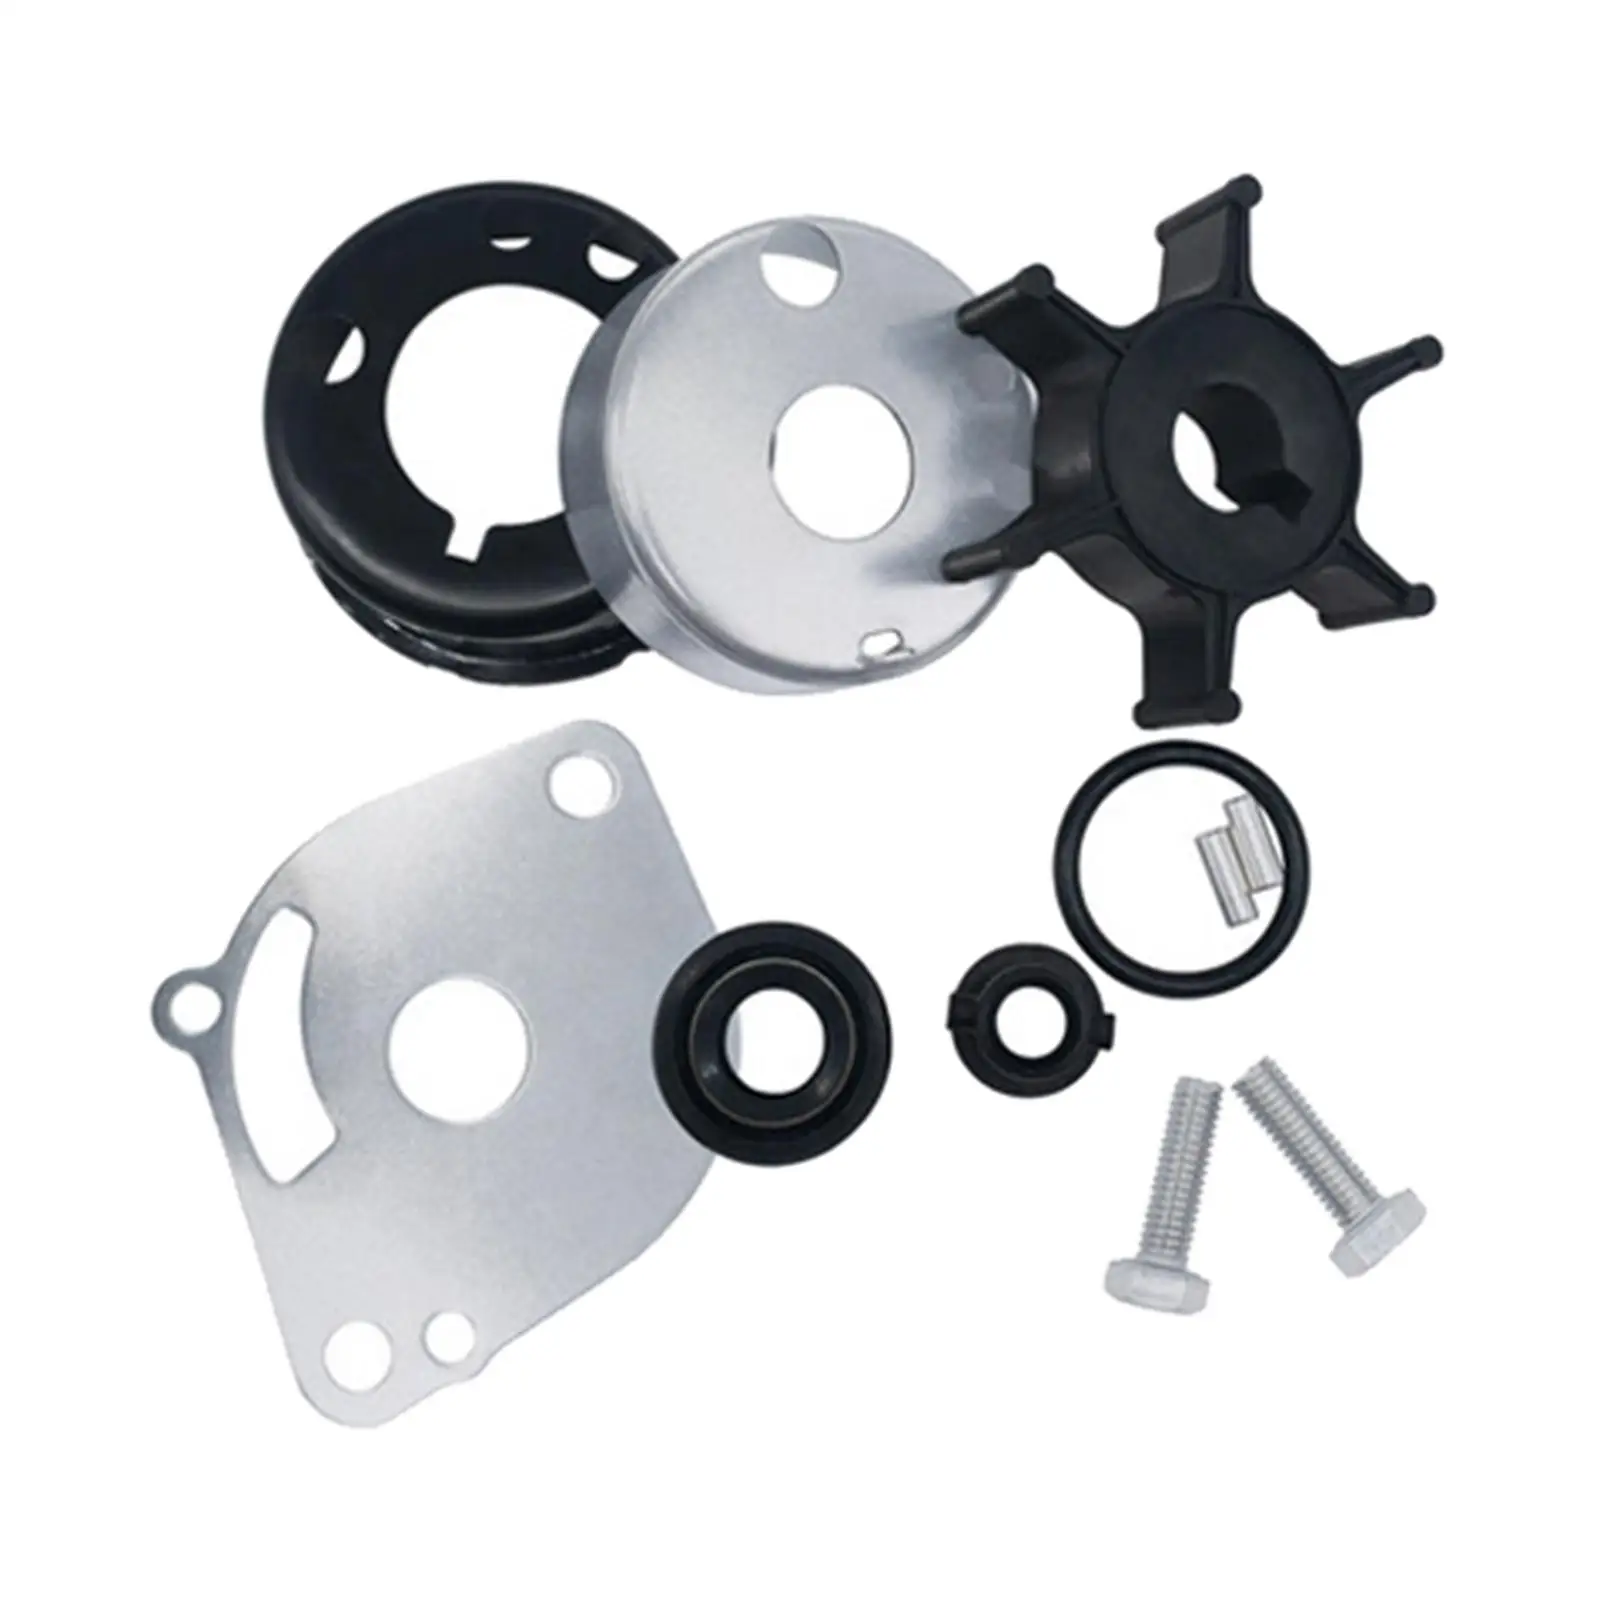 Water Pump Impeller Kit for YAMAHA 2HP 2 STROKE1988-2009 6A1-W0078-02 6A1-W0078-00   18-3462 Replacement New